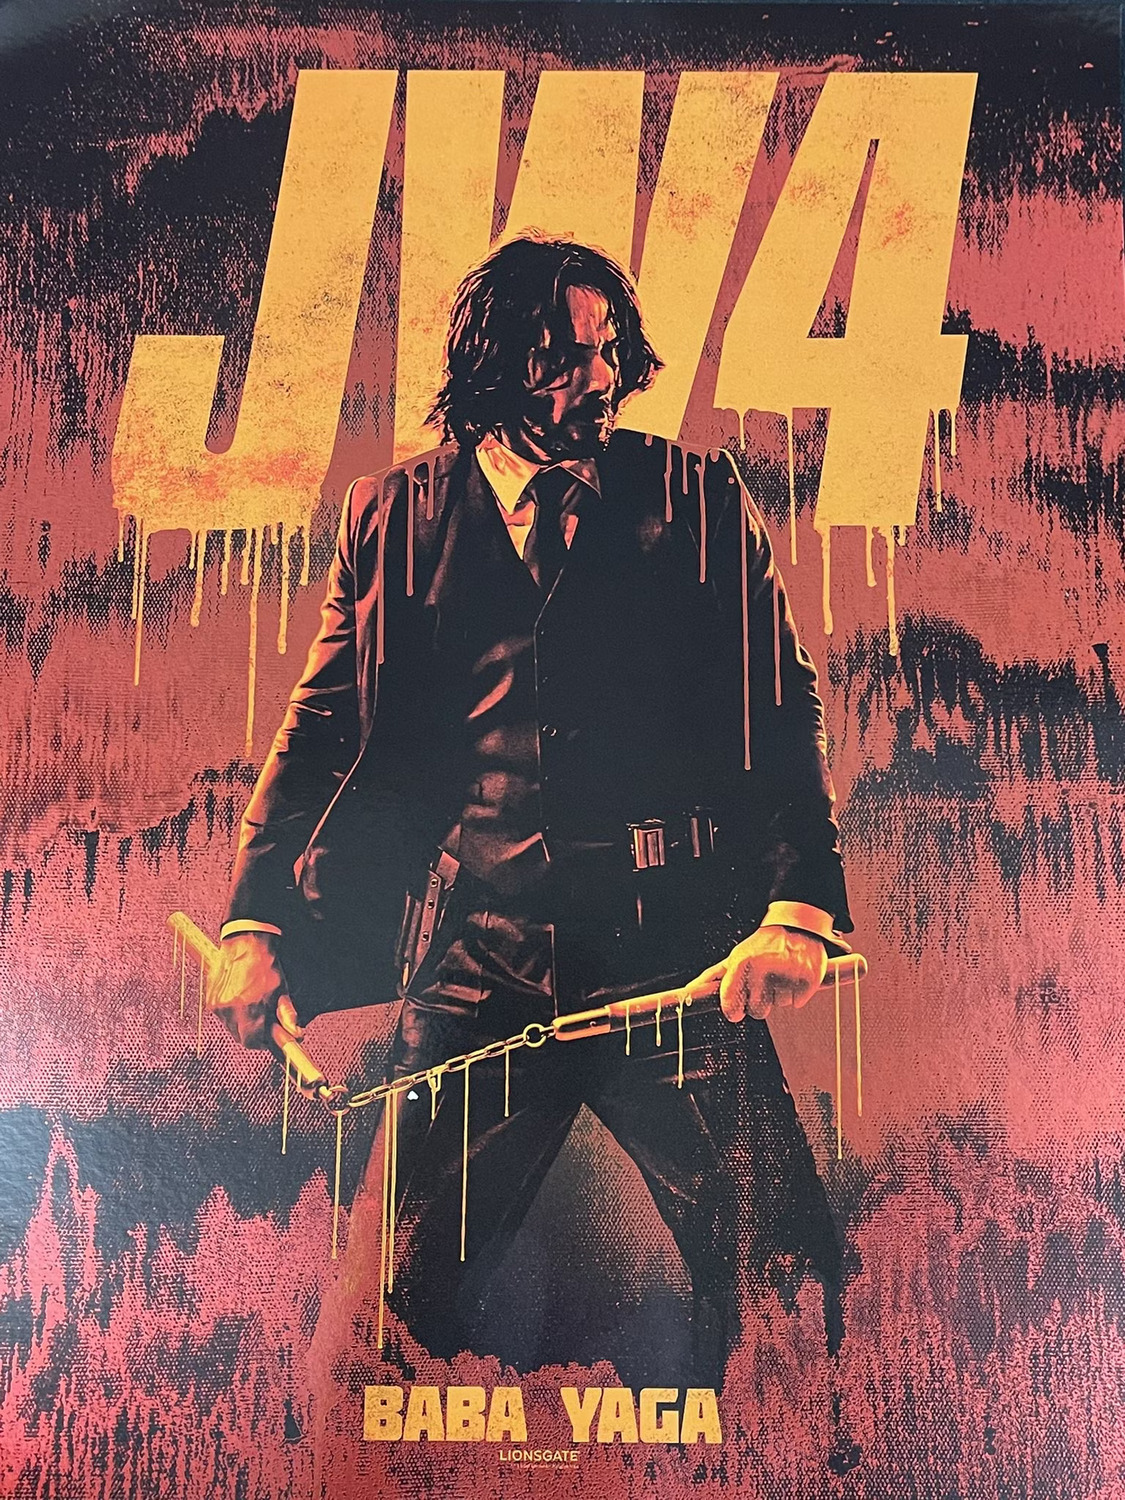 Checkm8x on X: There is no way back. JOHN WICK: CHAPTER 4